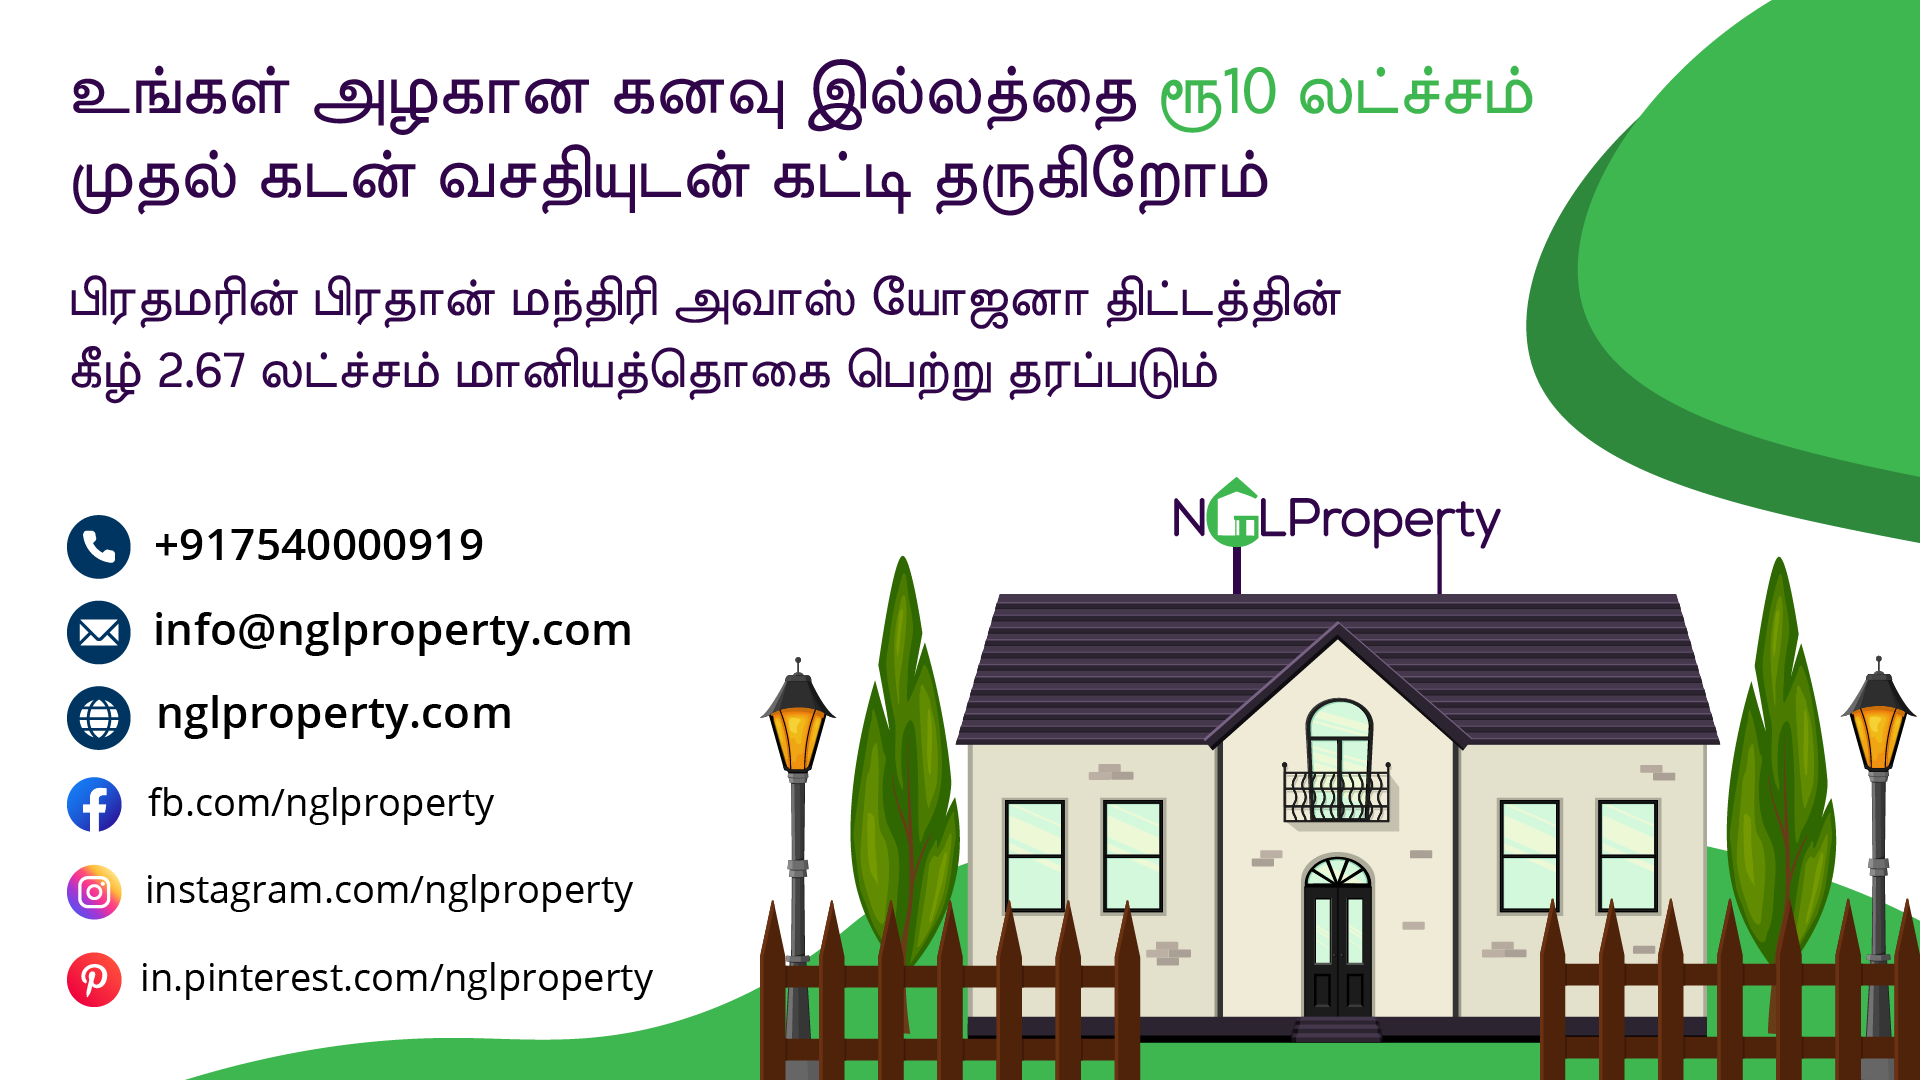 House For Sale In Nagercoil, Land For Sale In Nagercoil